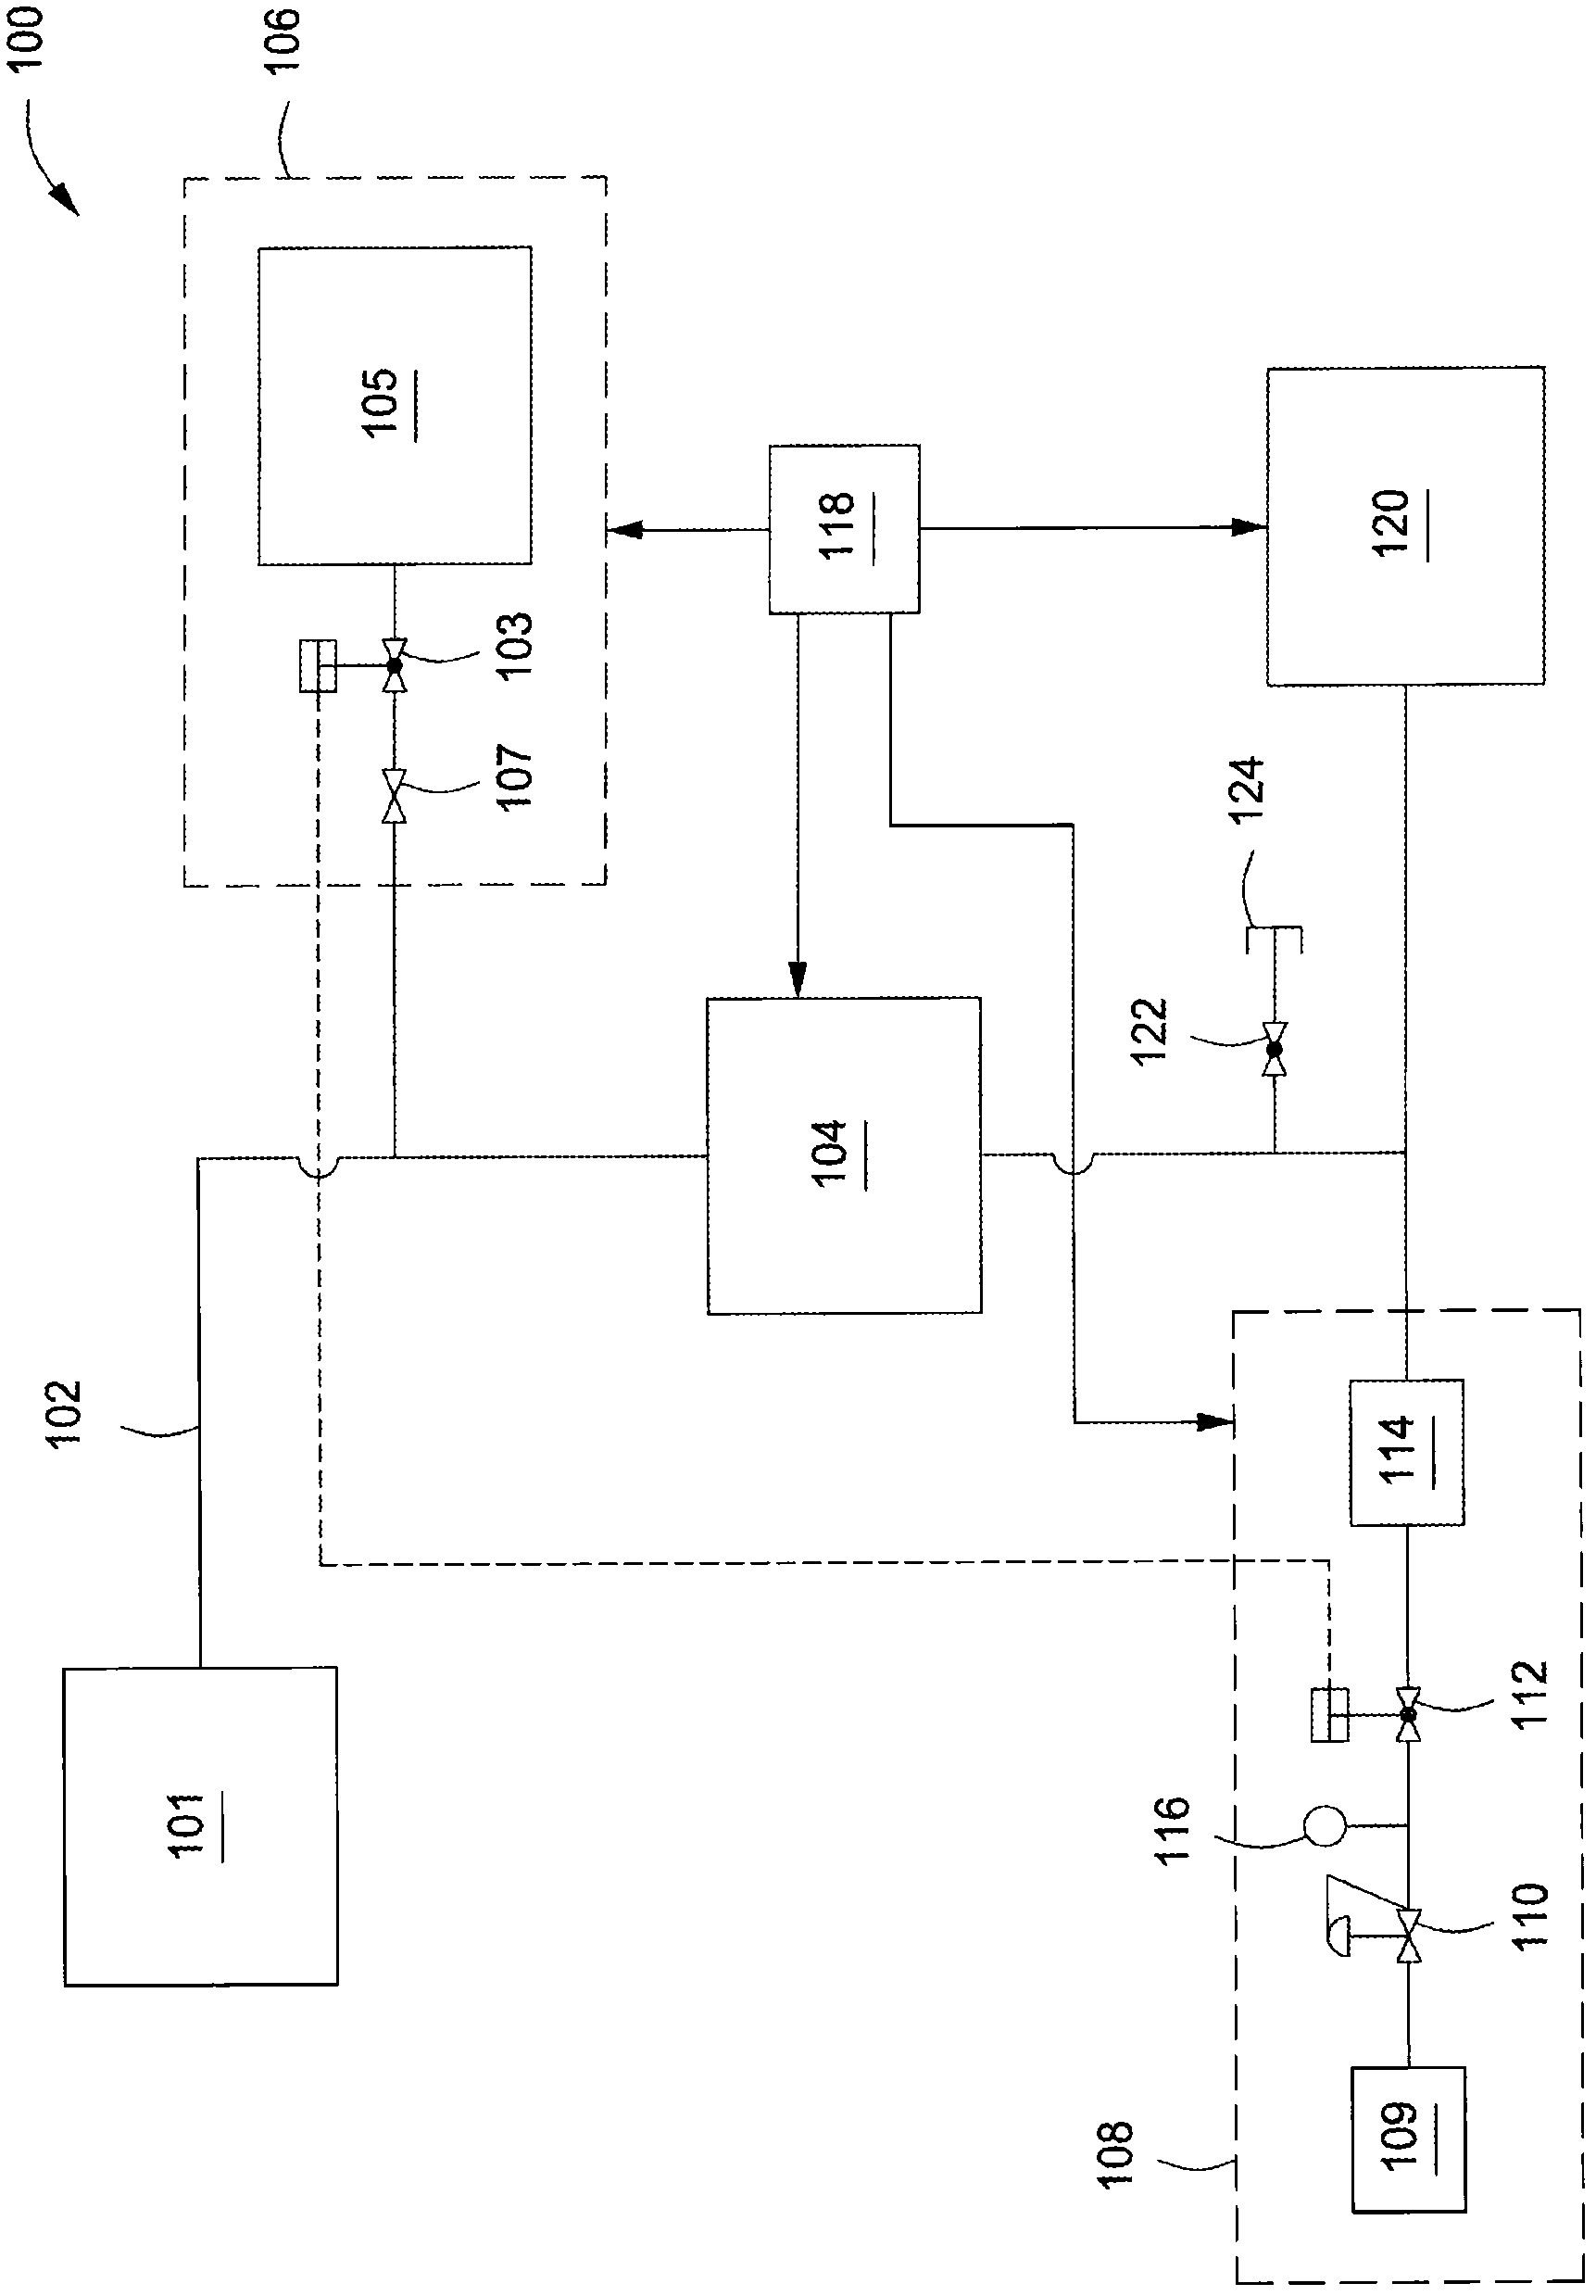 Methods and apparatus for treating exhaust gas in a processing system